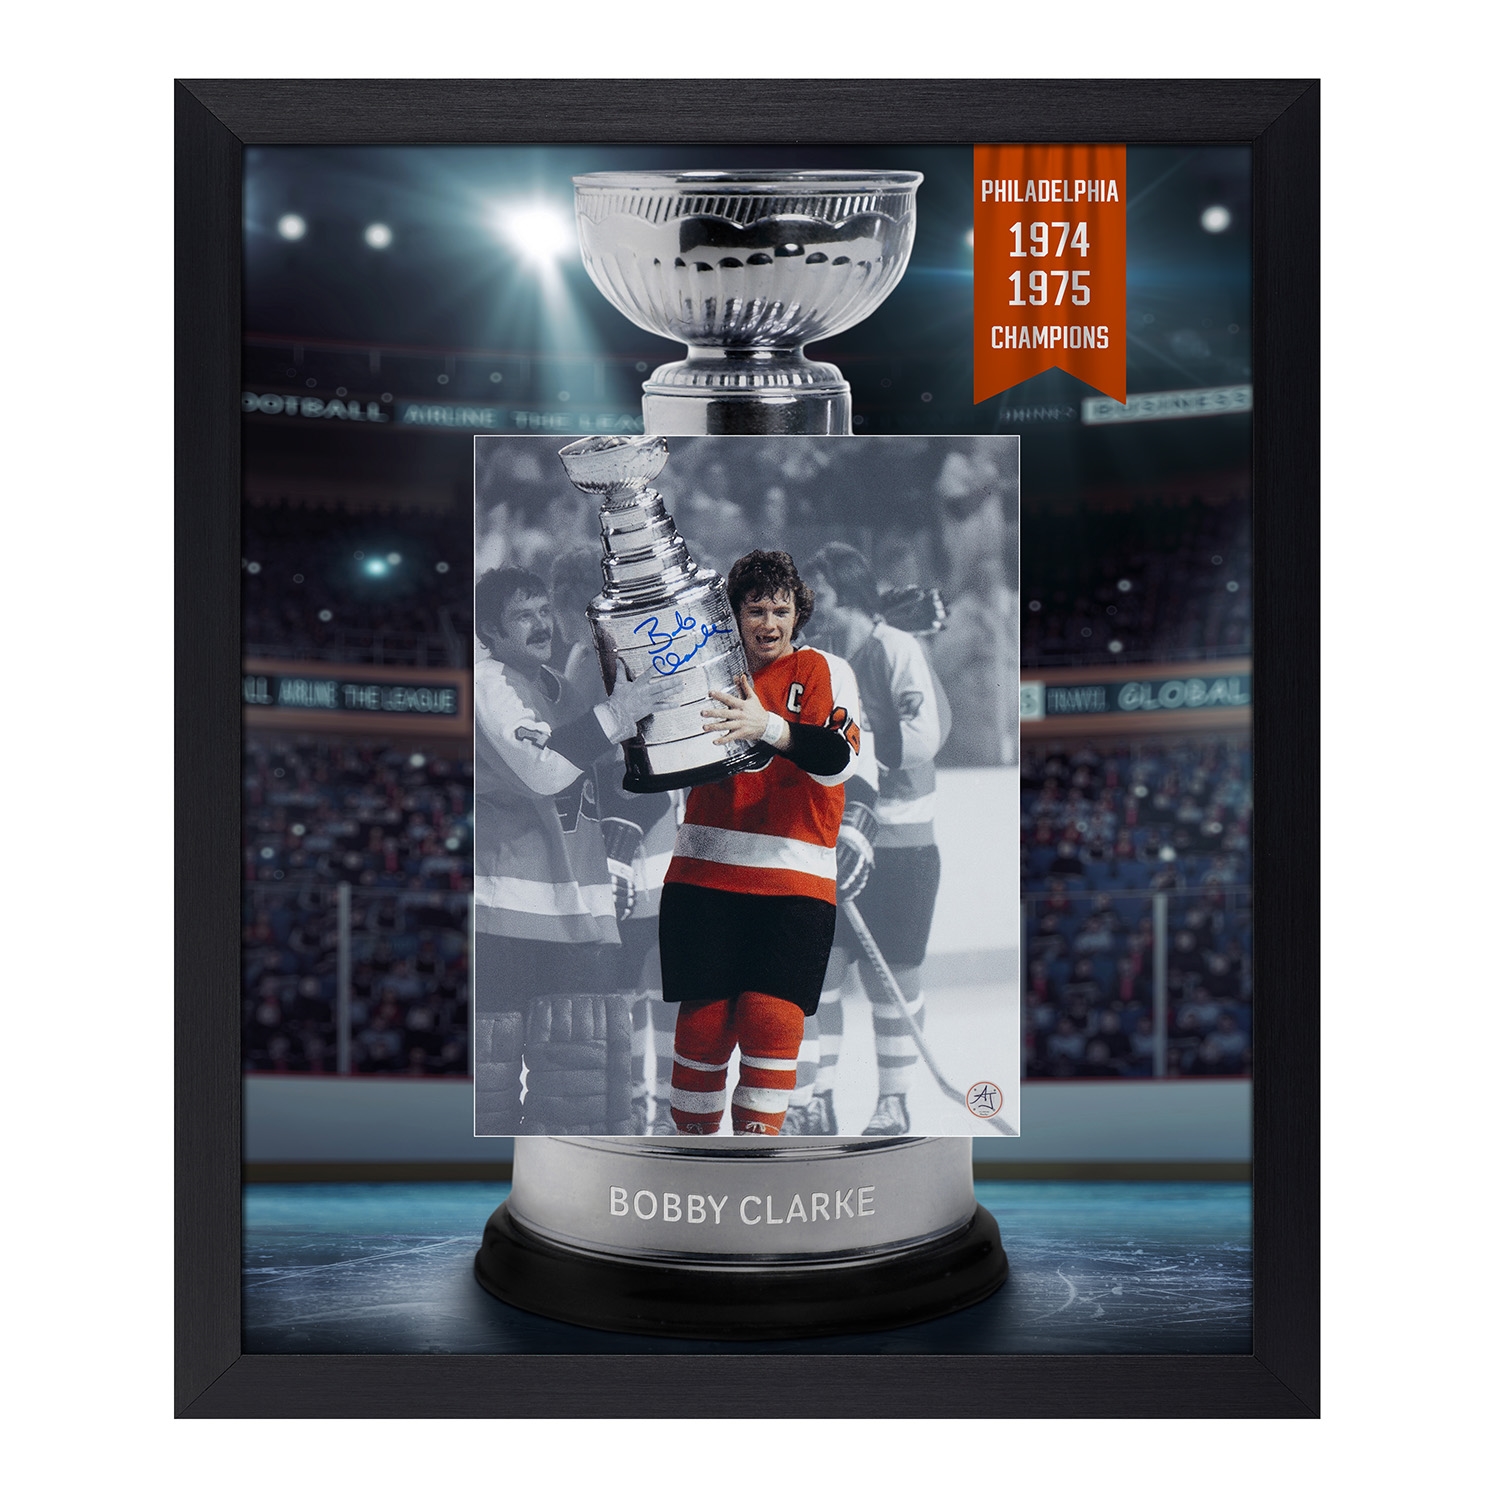 Bobby Clarke Signed Philadelphia Flyers Cup Champion Graphic 23x27 Frame